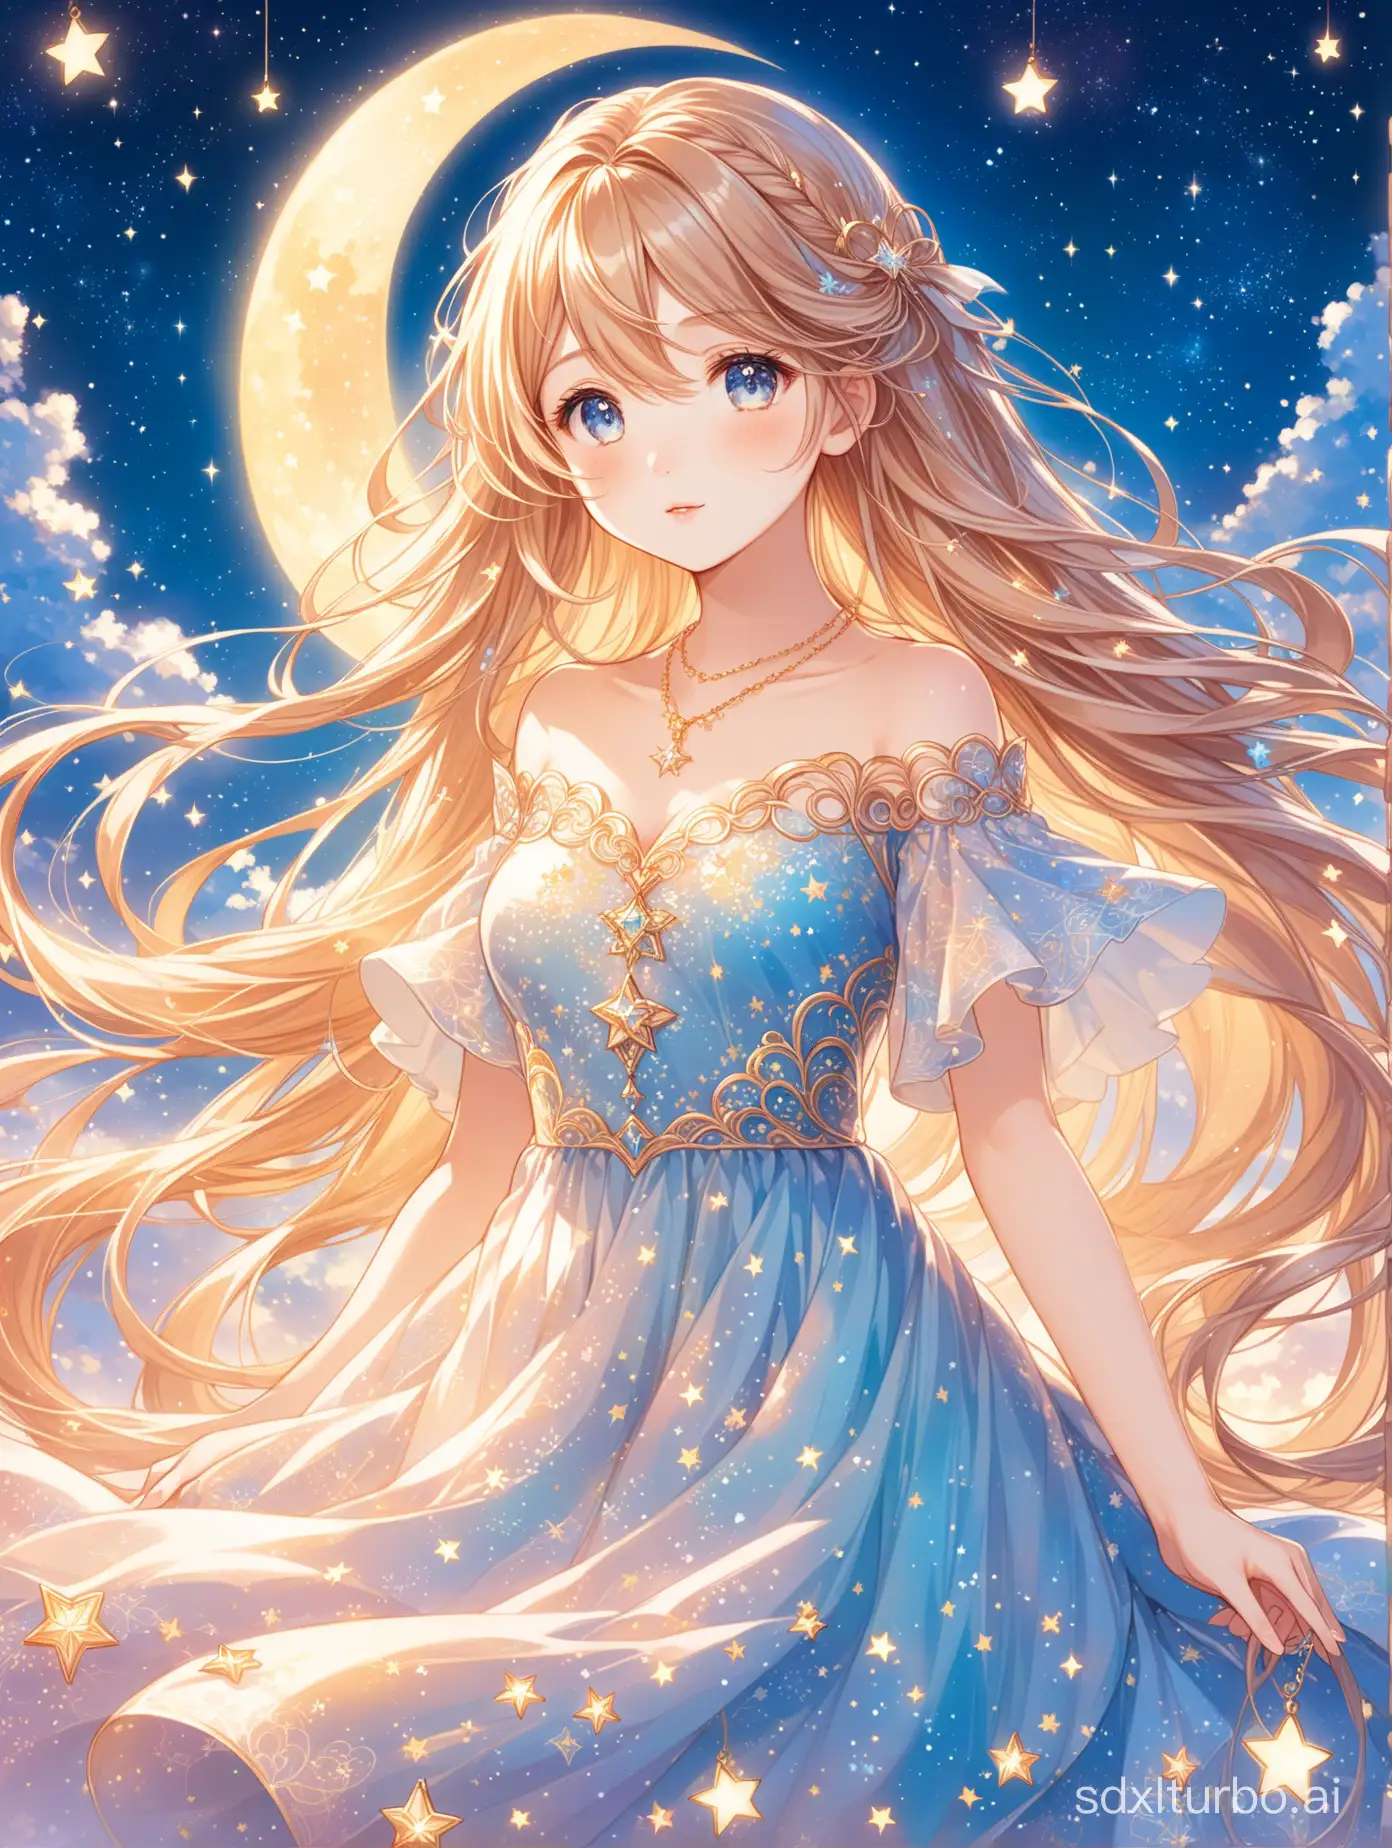 Ethereal-Anime-Girl-in-Starlit-Sky-Captivating-Illustration-of-a-Dreamy-Character